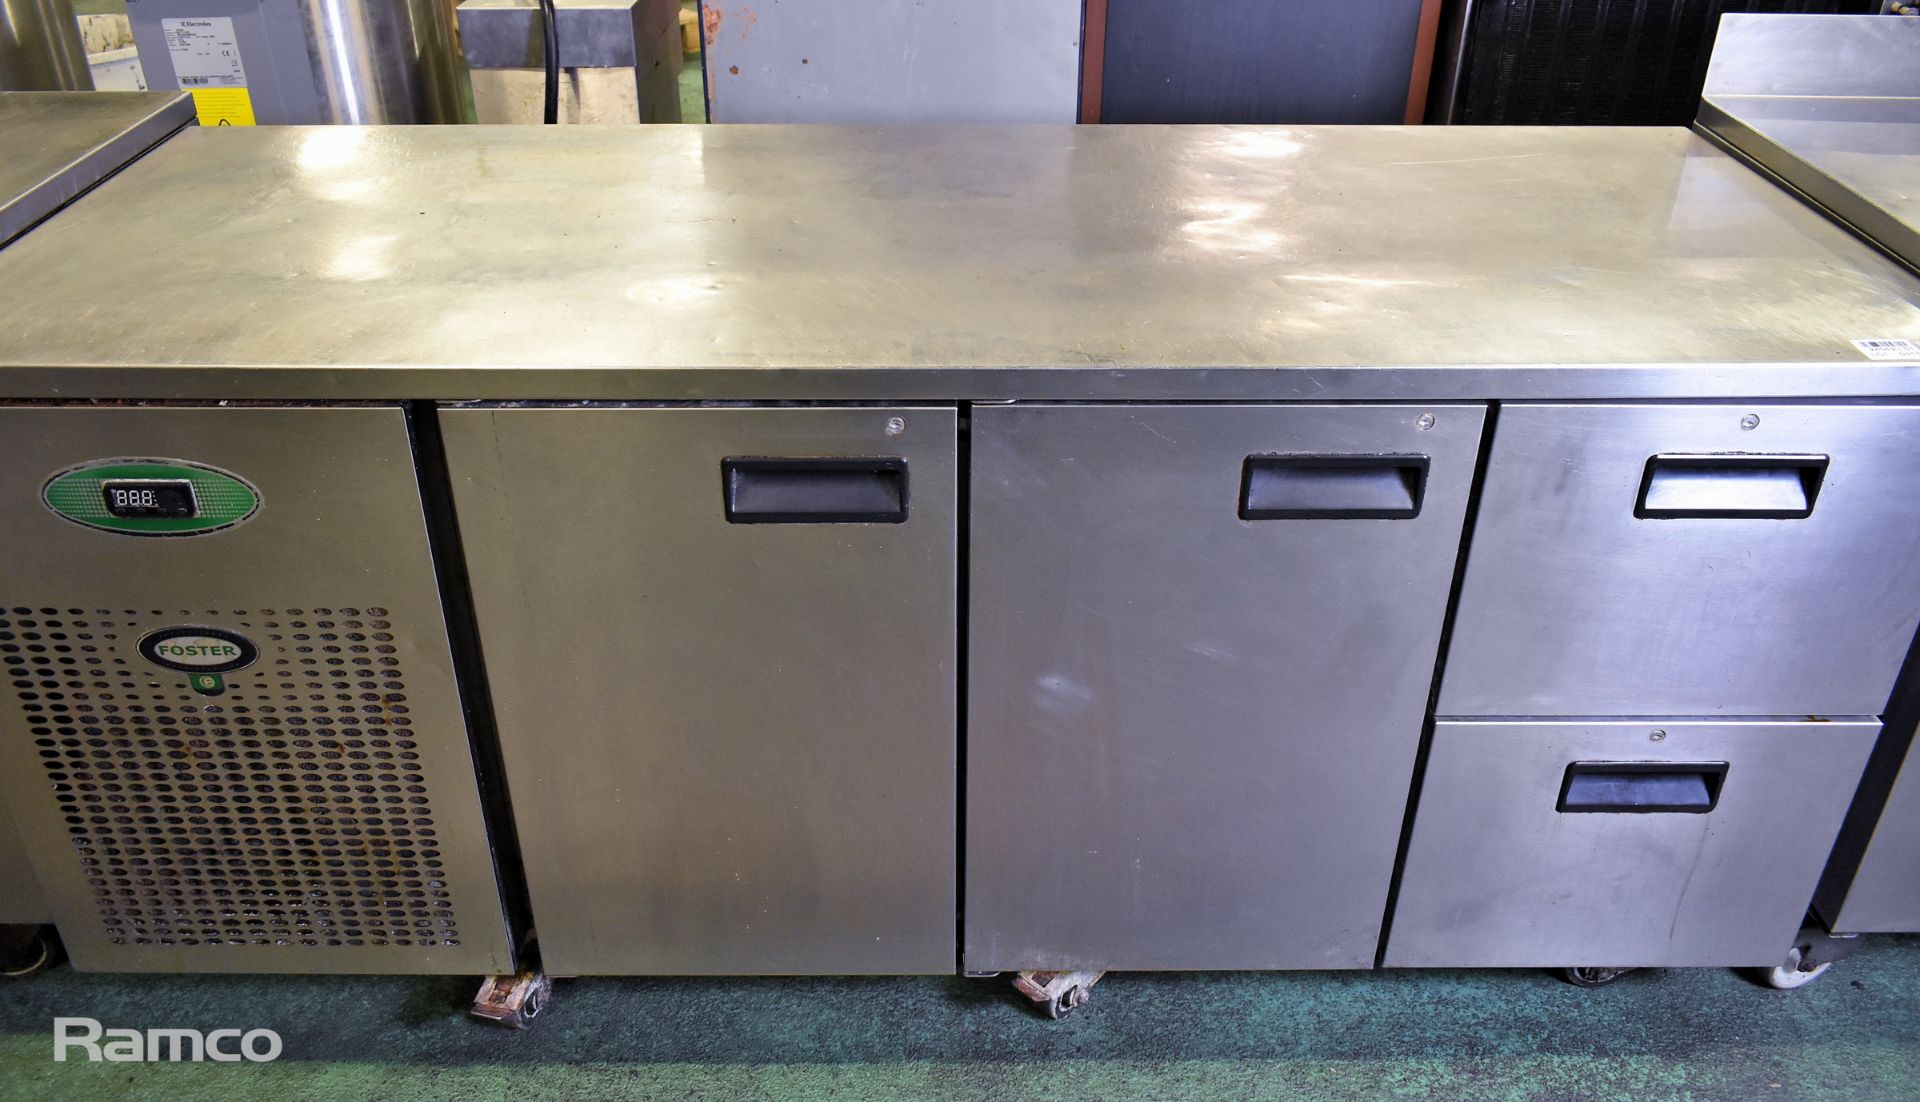 Foster stainless steel double door double drawer counter fridge - W 1860 x D 700 x H 870mm - Image 4 of 5